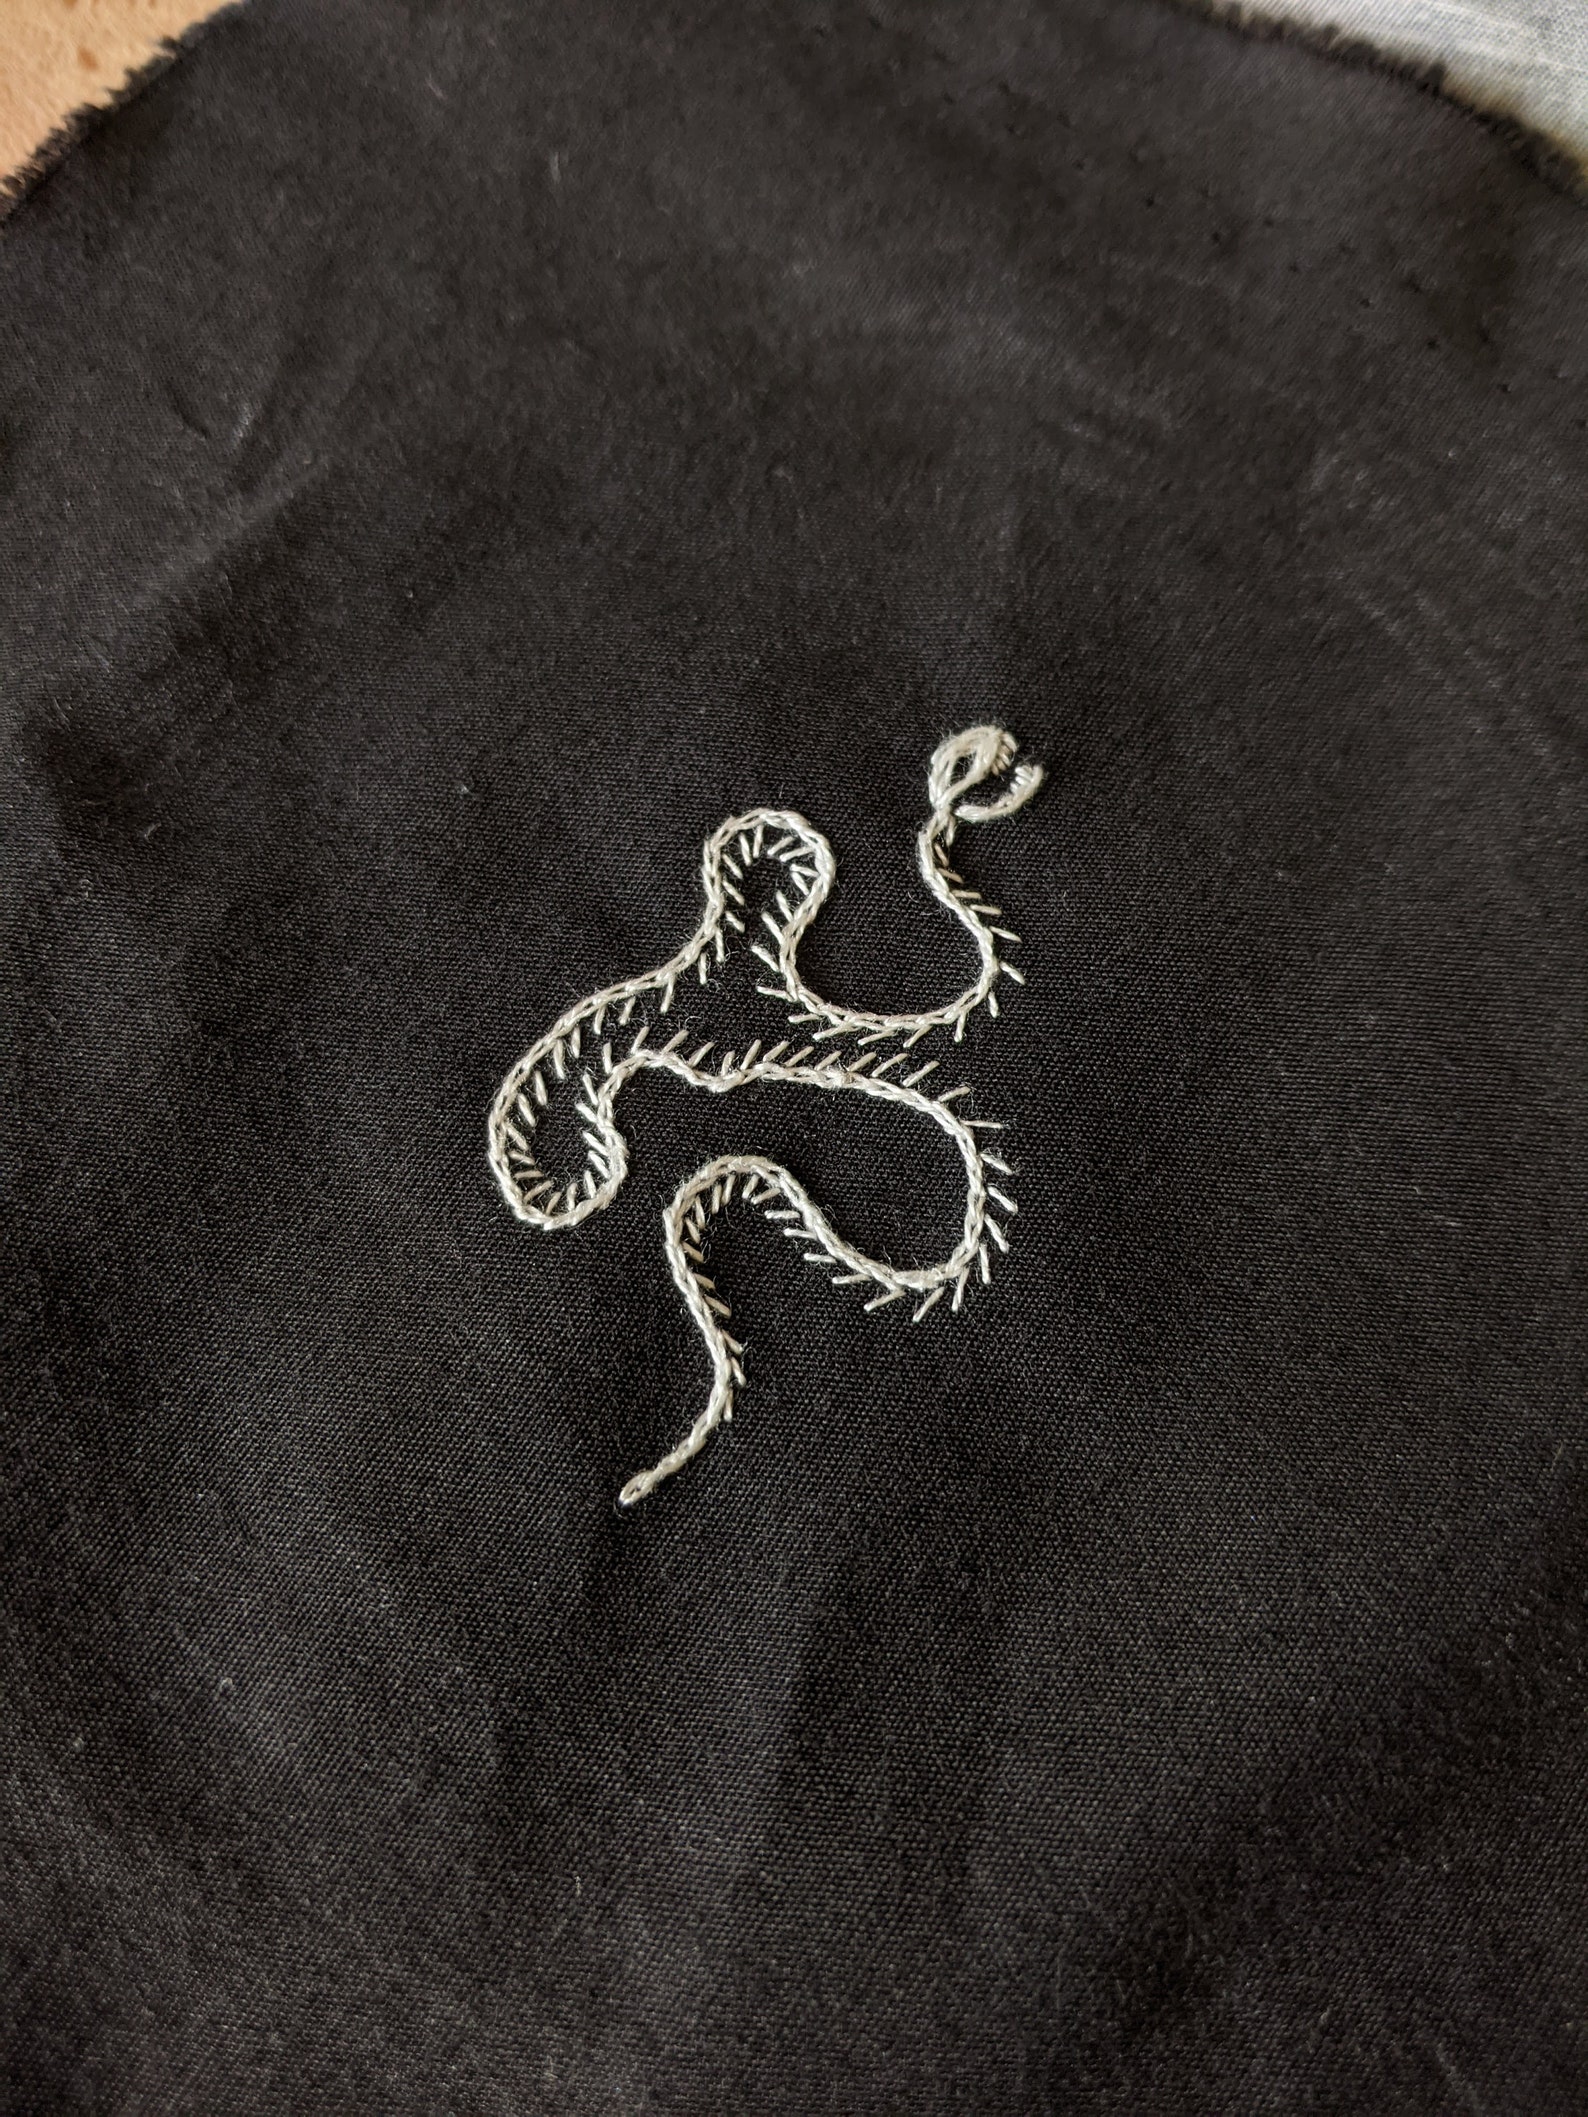 Snake Embroidery No.5 Writhe - Etsy